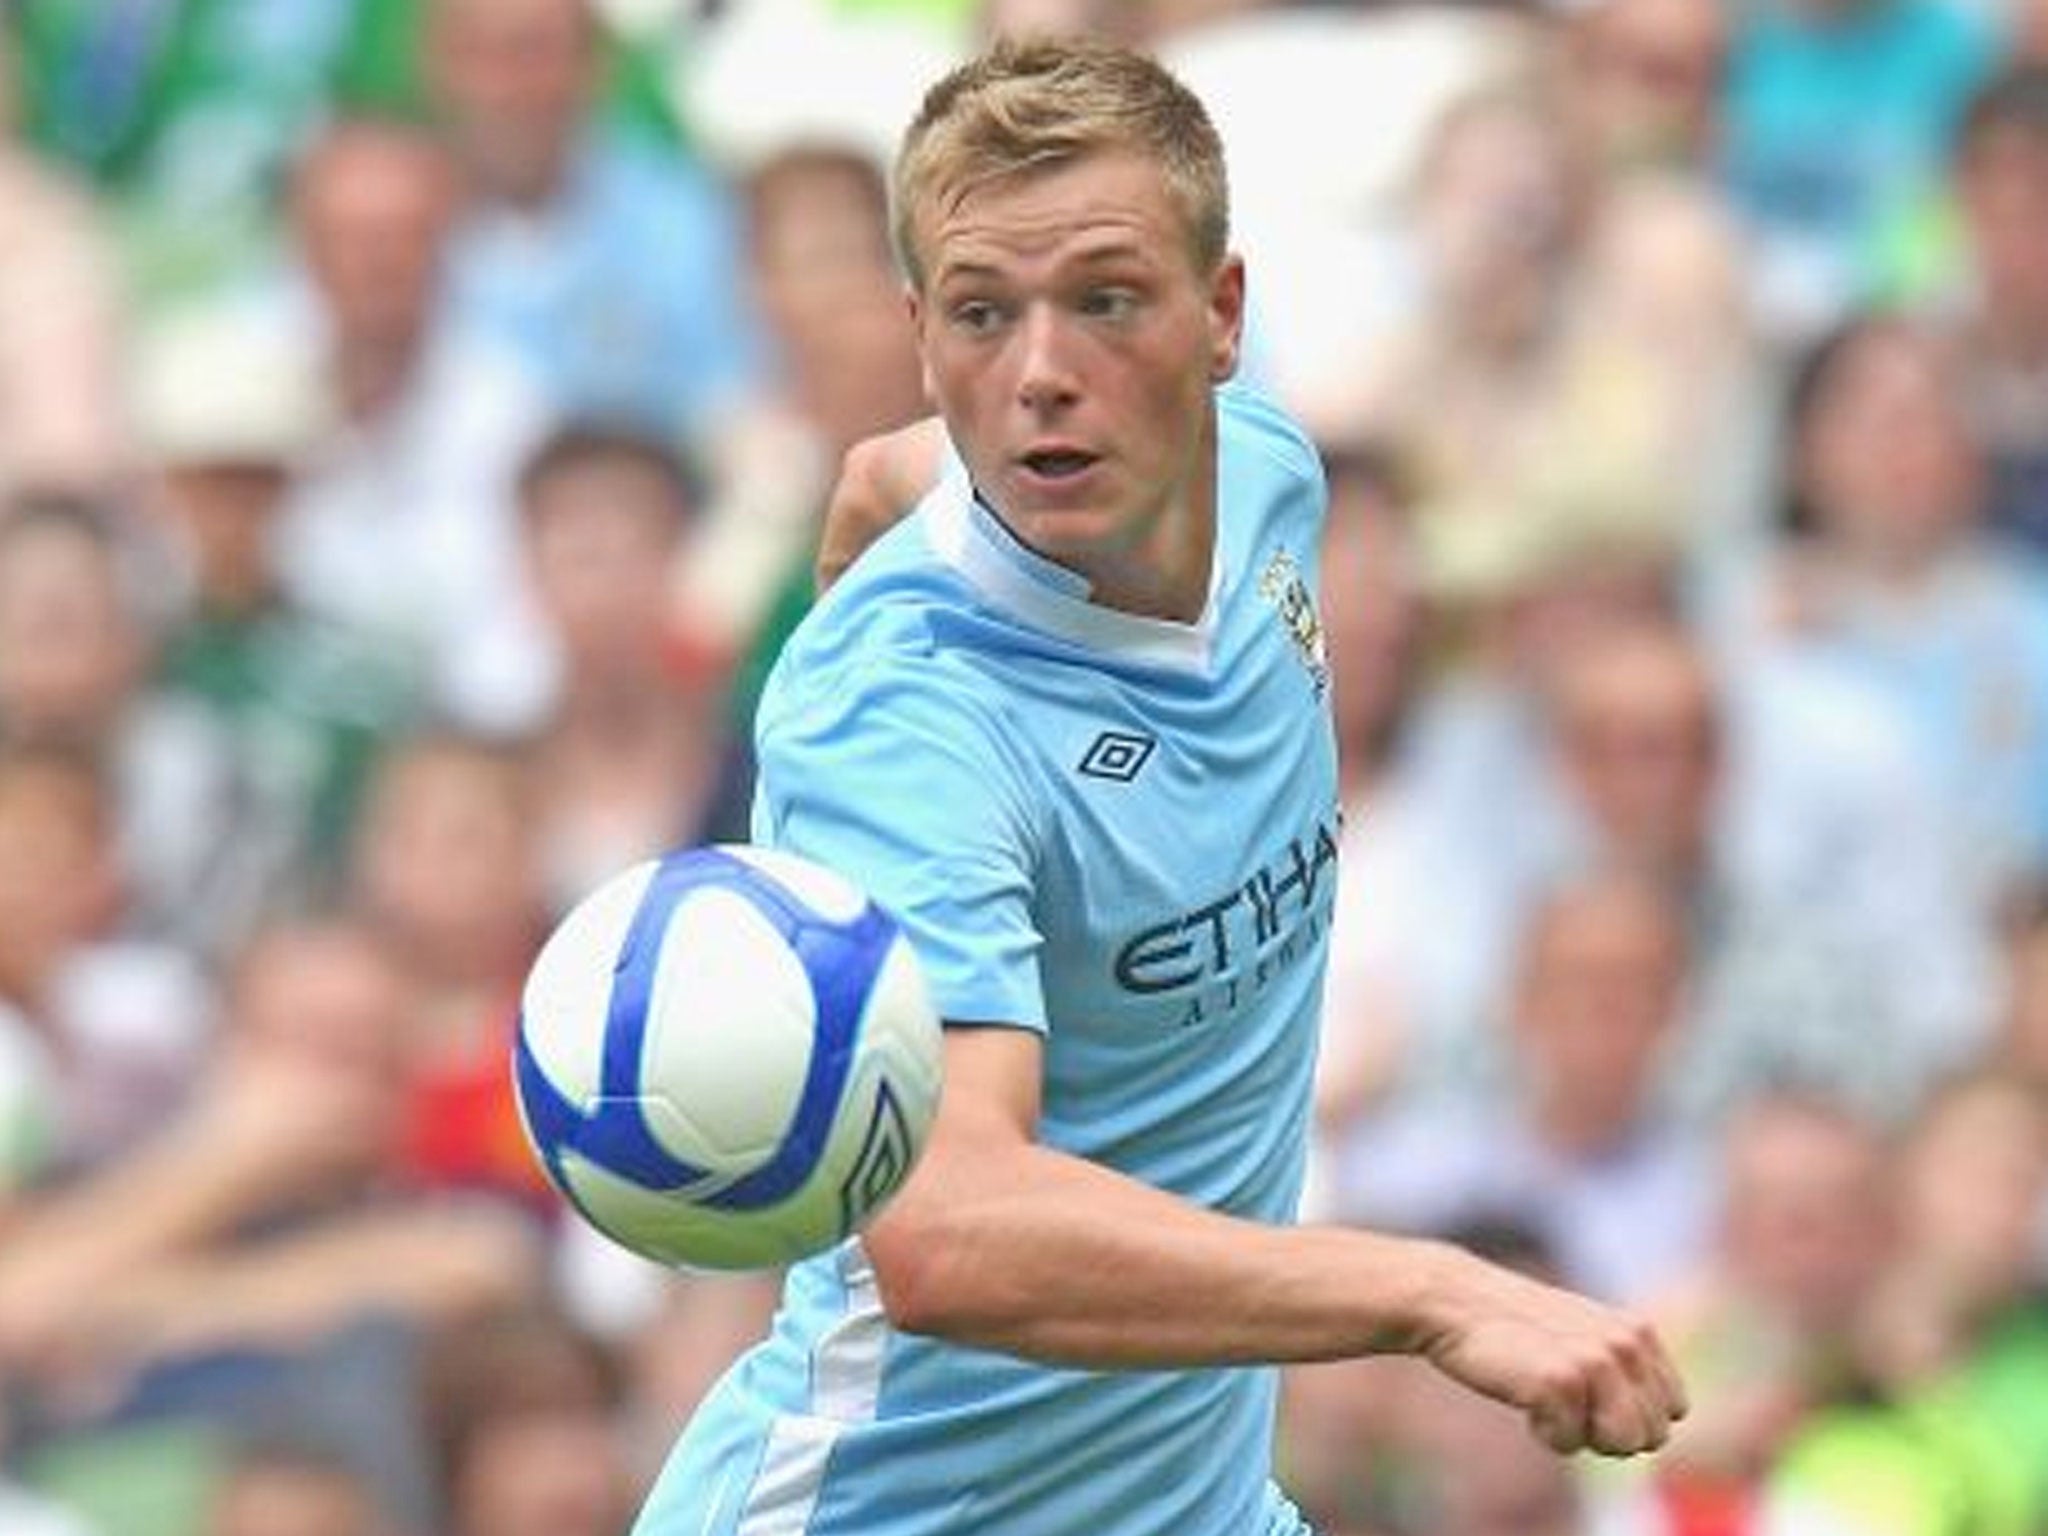 John Guidetti, 20: The Swedish striker has made one appearance – the League Cup defeat by West Bromwich in September 2010. Scored 20 goals in 23 matches on loan at Feyenoord, though injury has curtailed him